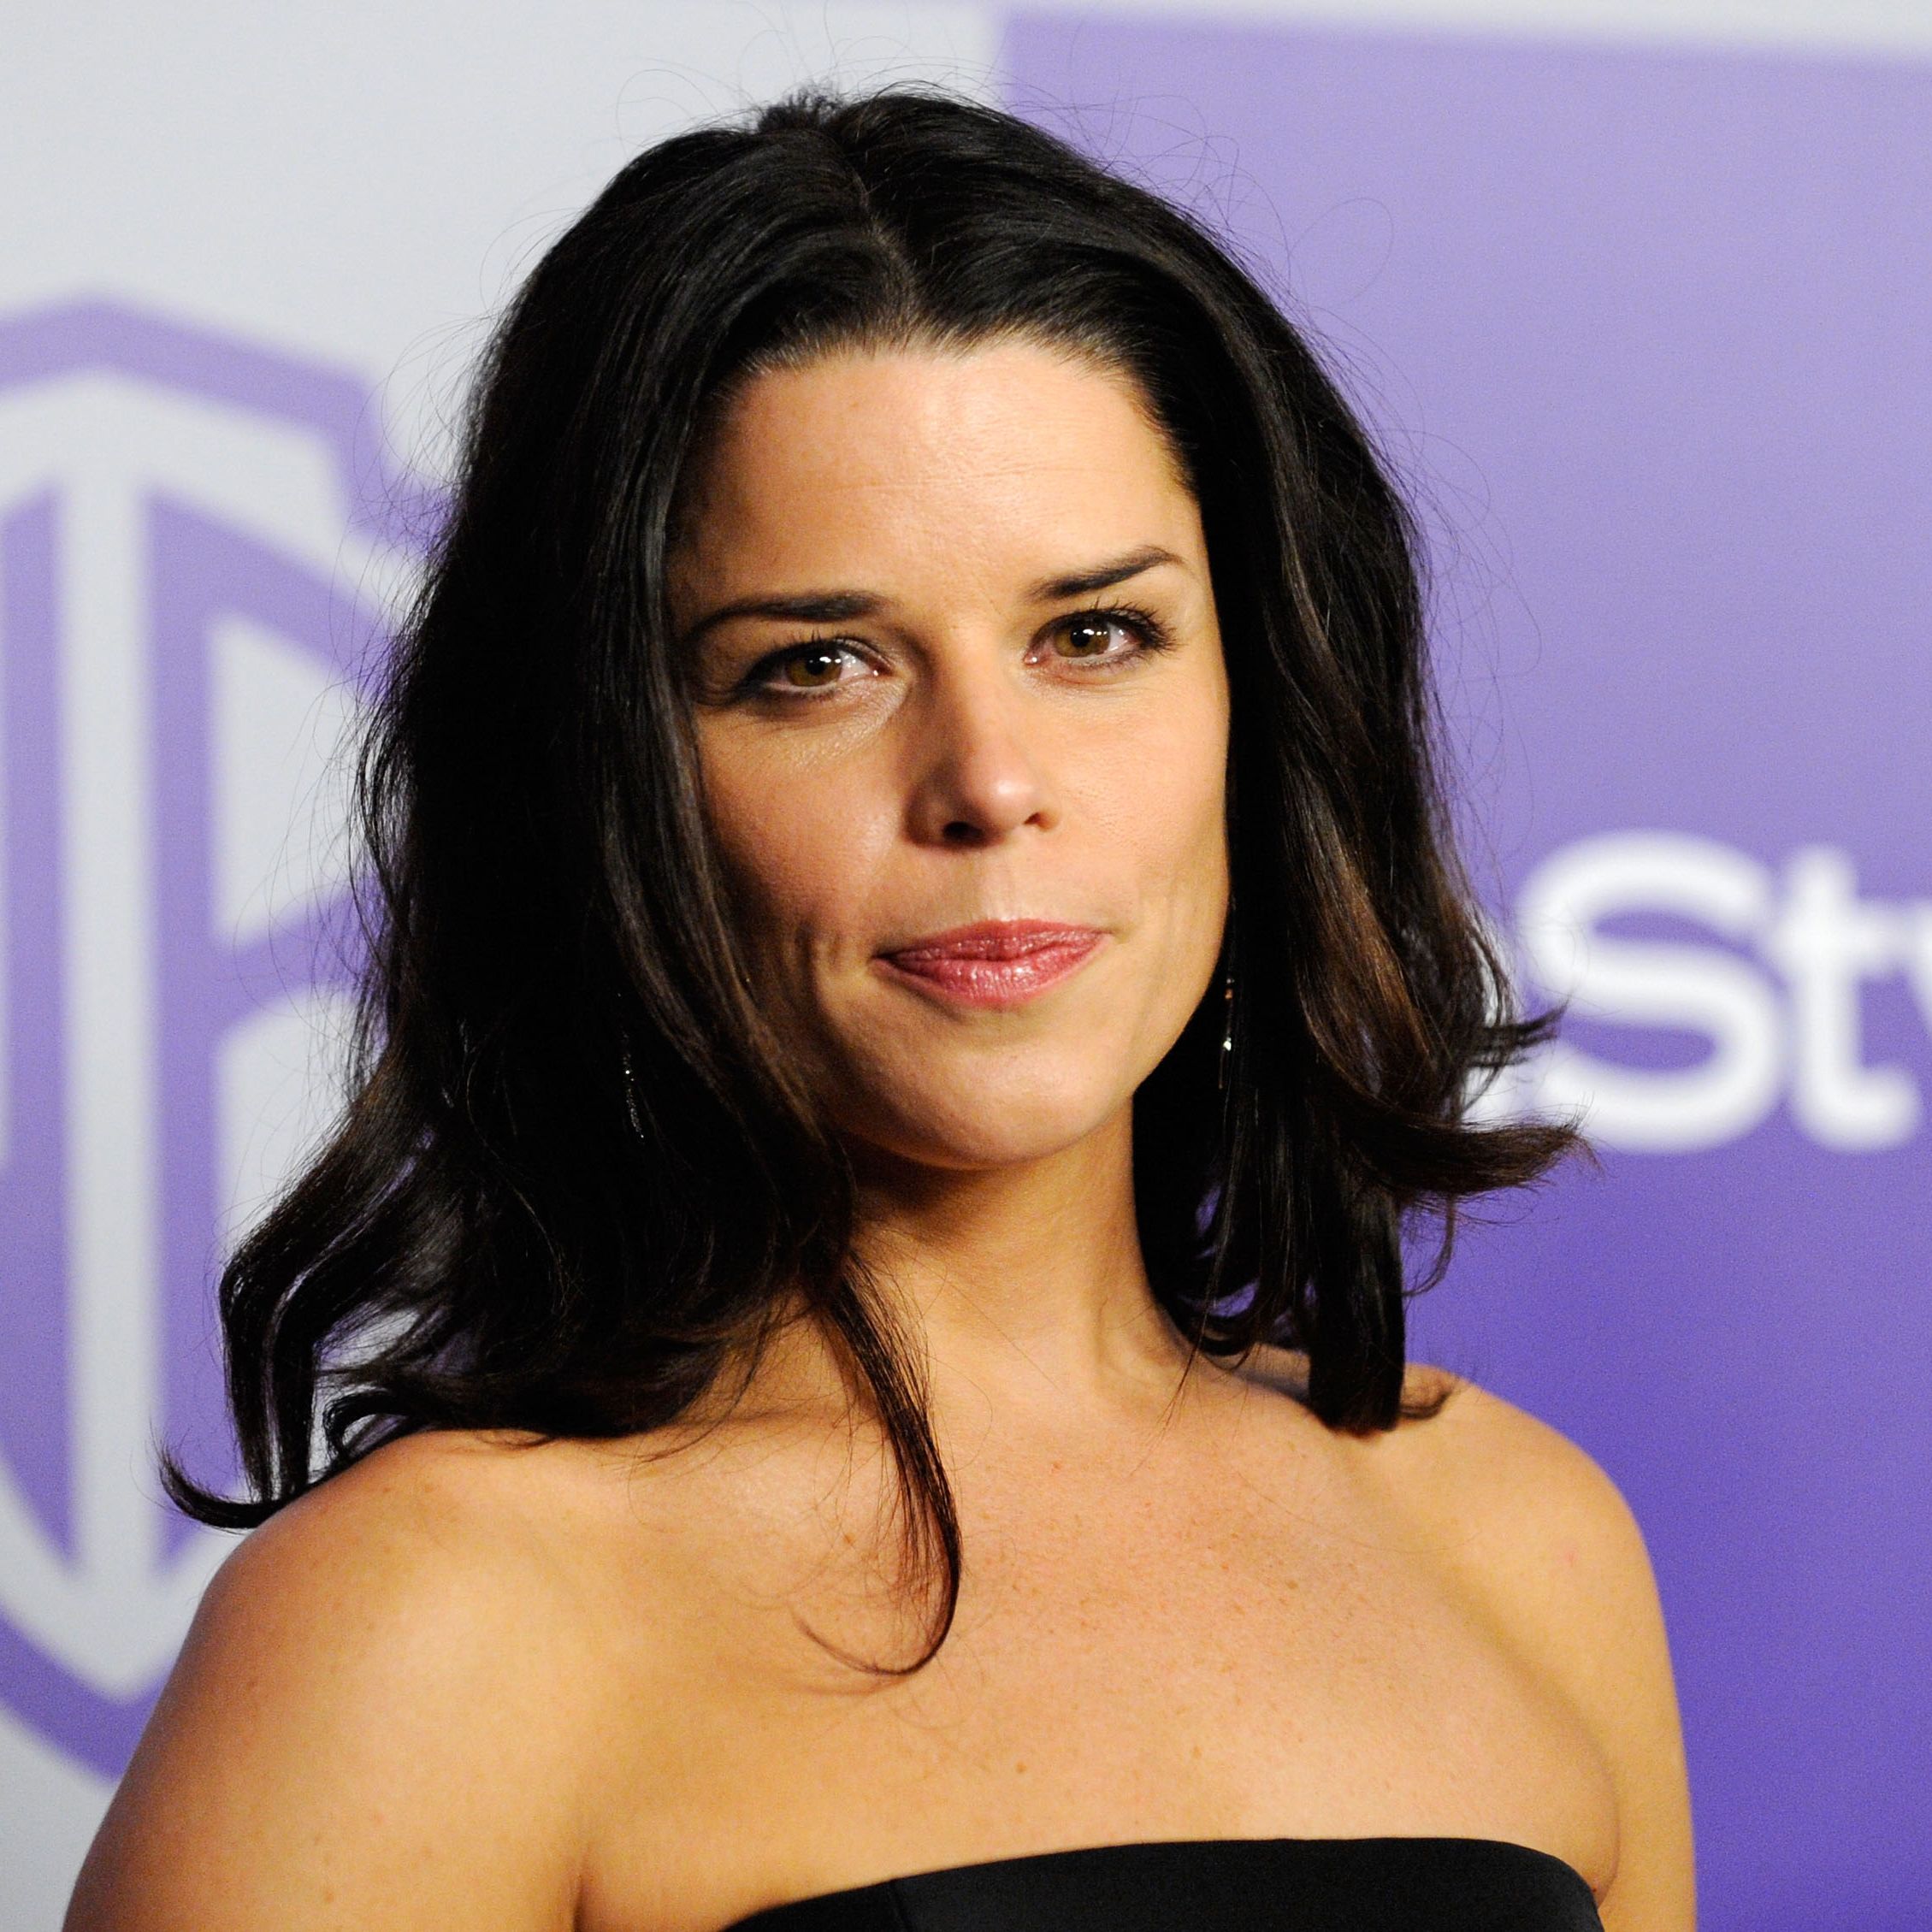 Inside Neve Campbell's Net Worth and 'Scream' Earnings